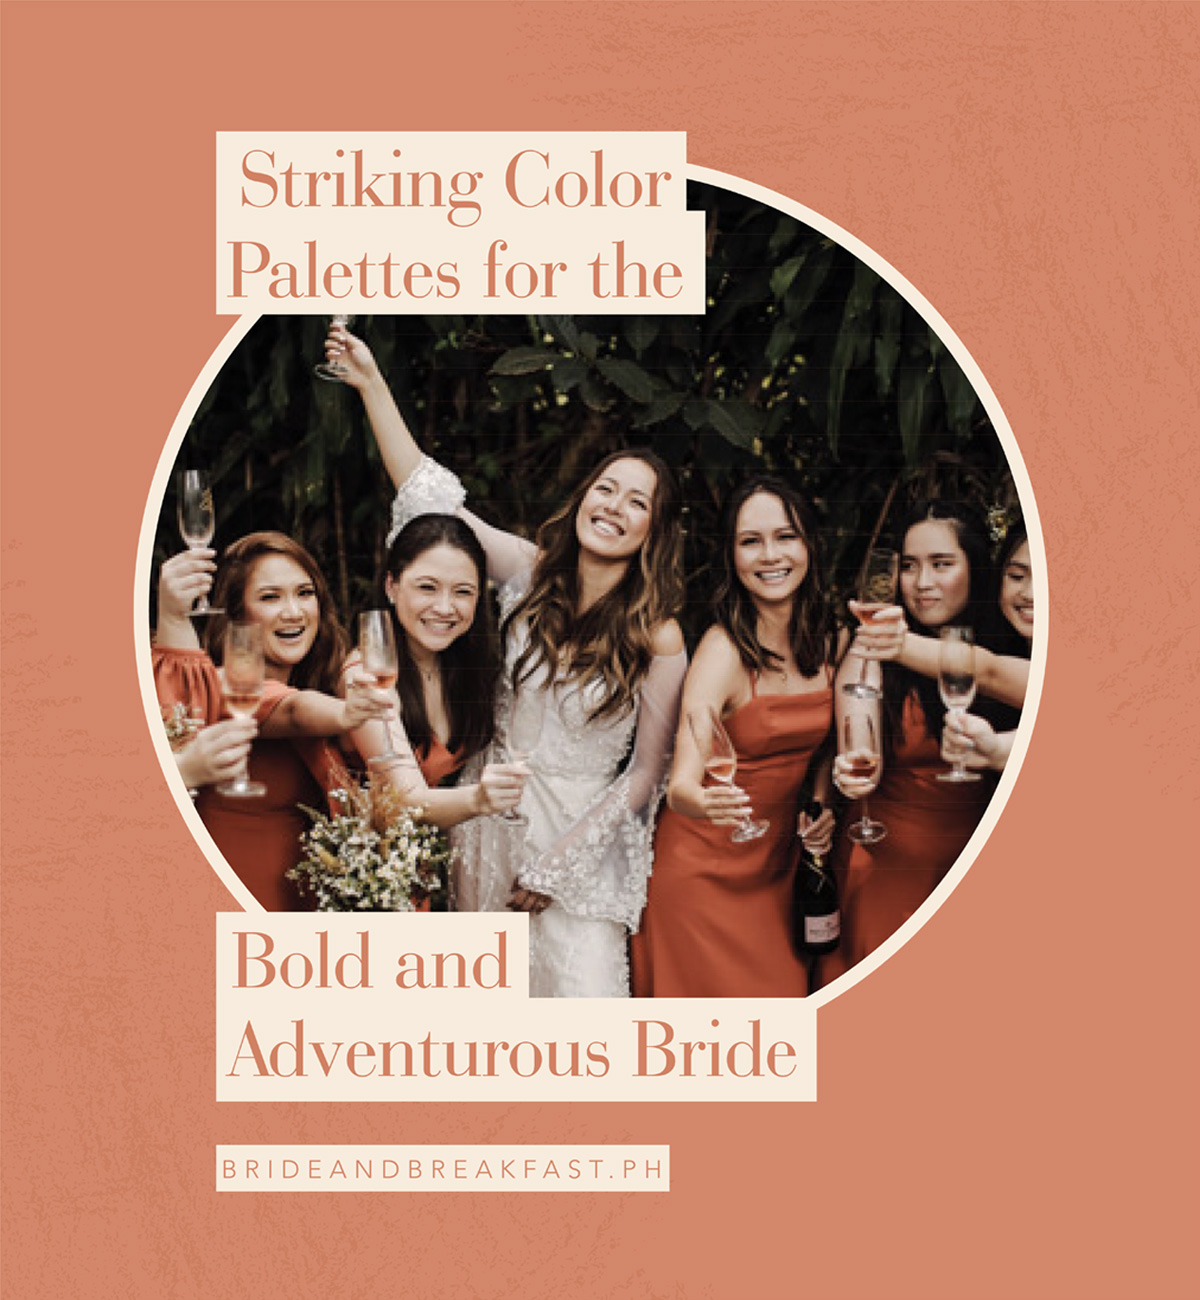 Striking Color Palettes for the Bold and Adventurous Bride